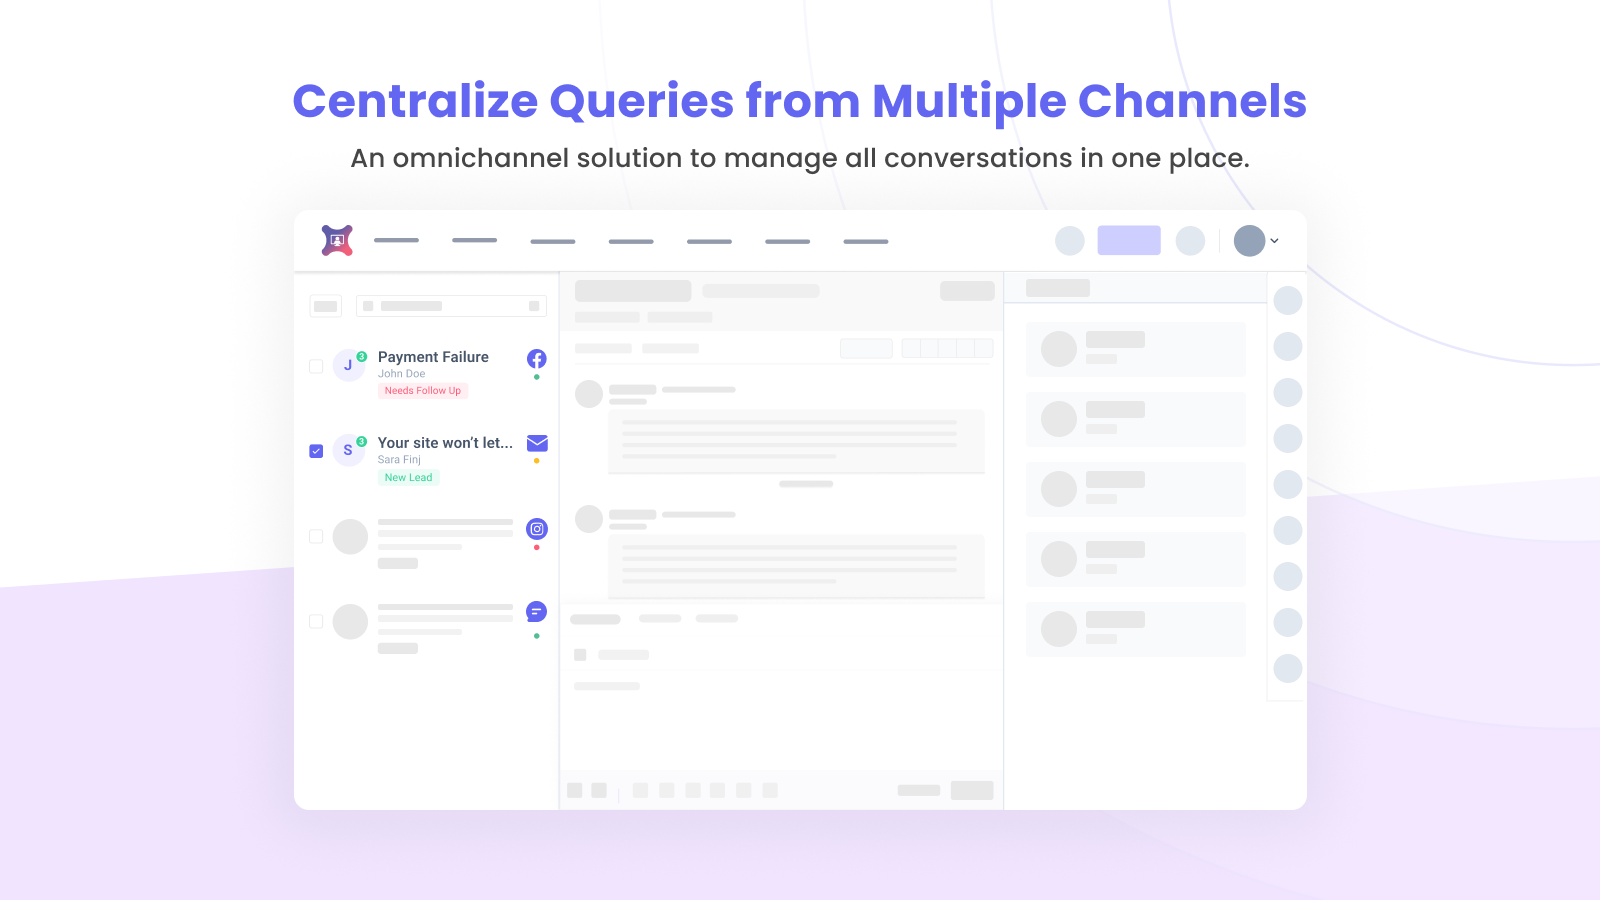 Centralize Queries from Multiple Channels